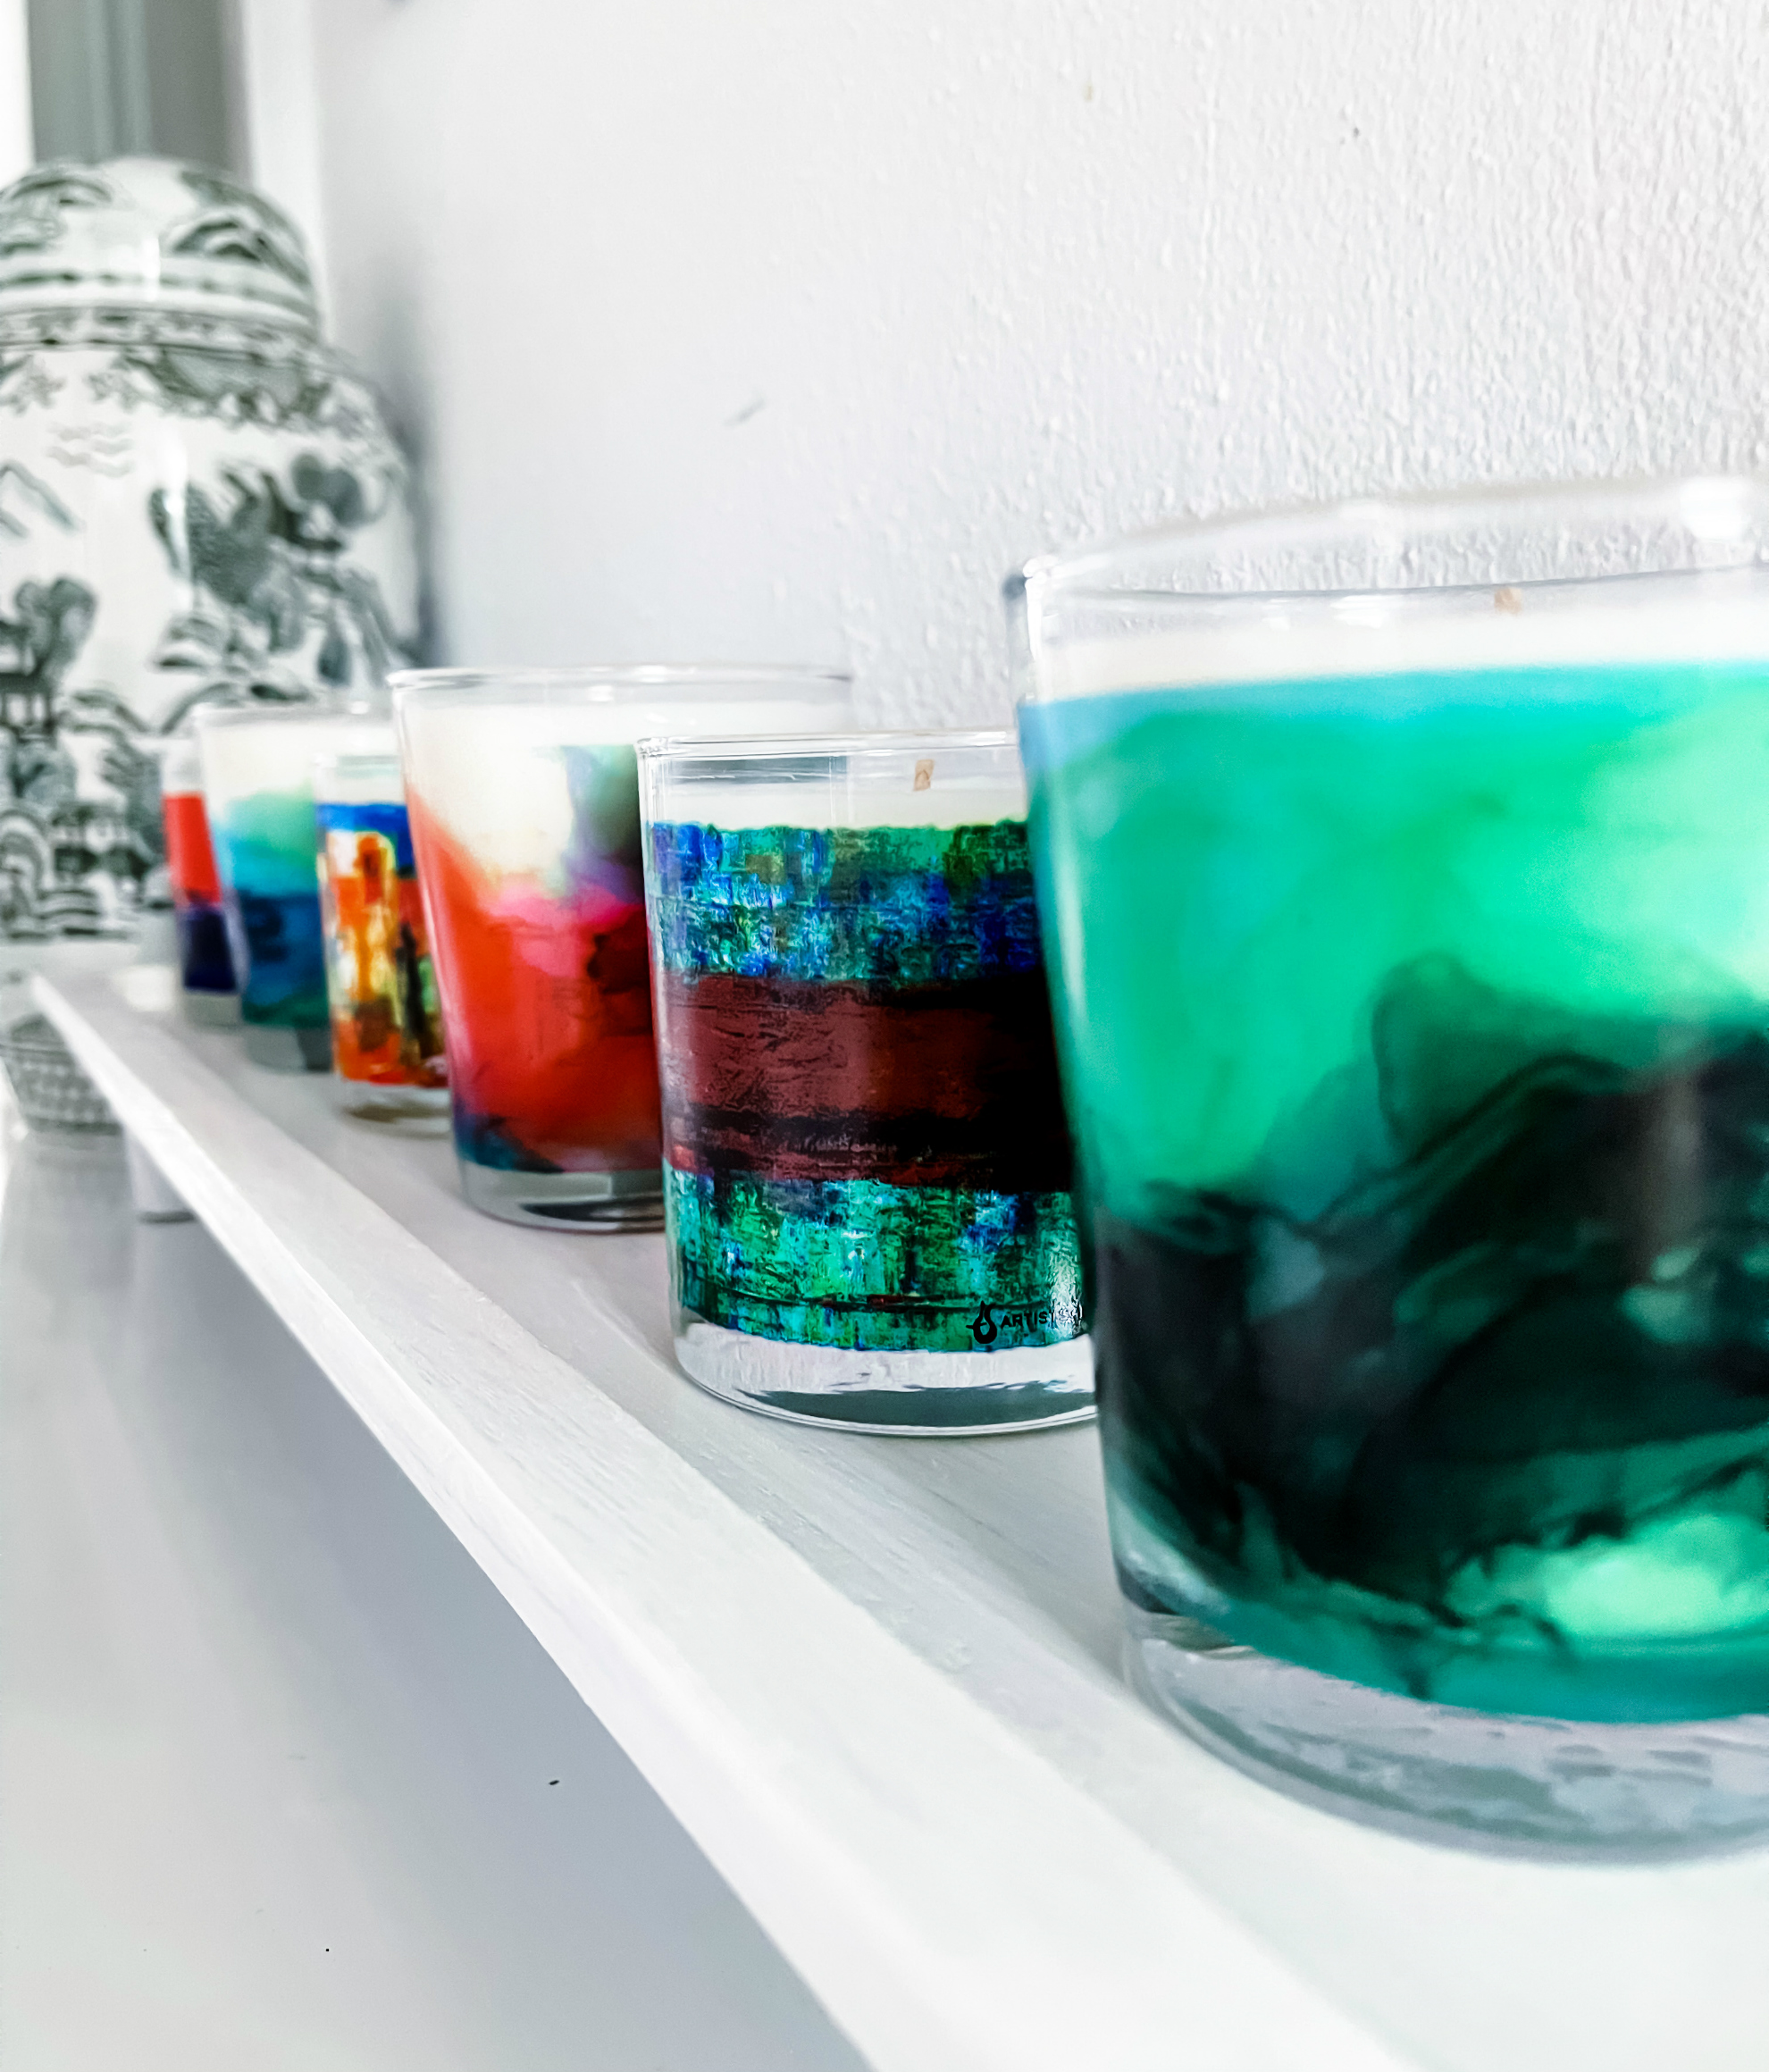 Artistscent Fragrance Candles, Candle Styling In Home, Candle Decor, Ronnie Queenan, Elizabeth Karlson